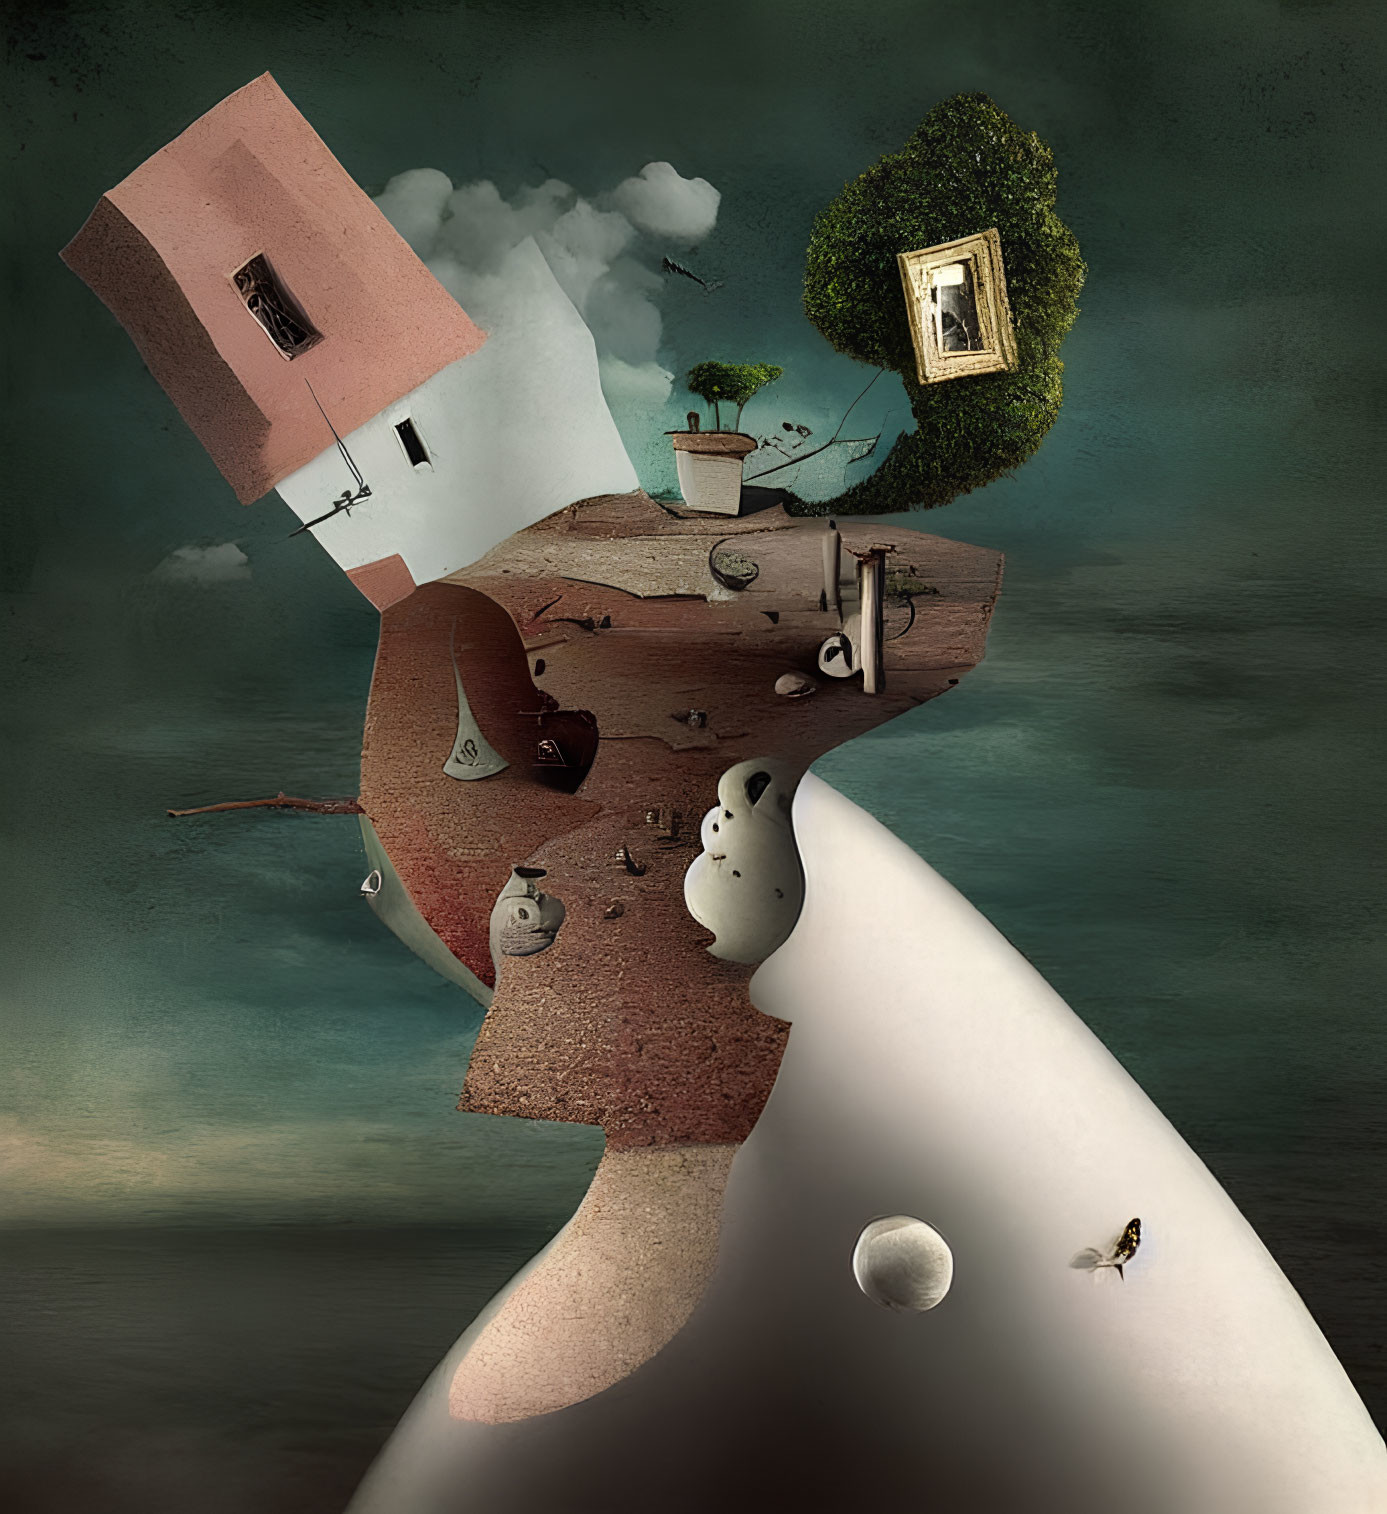 Whimsical floating land piece with house, tree, picture frame, and rock formations.